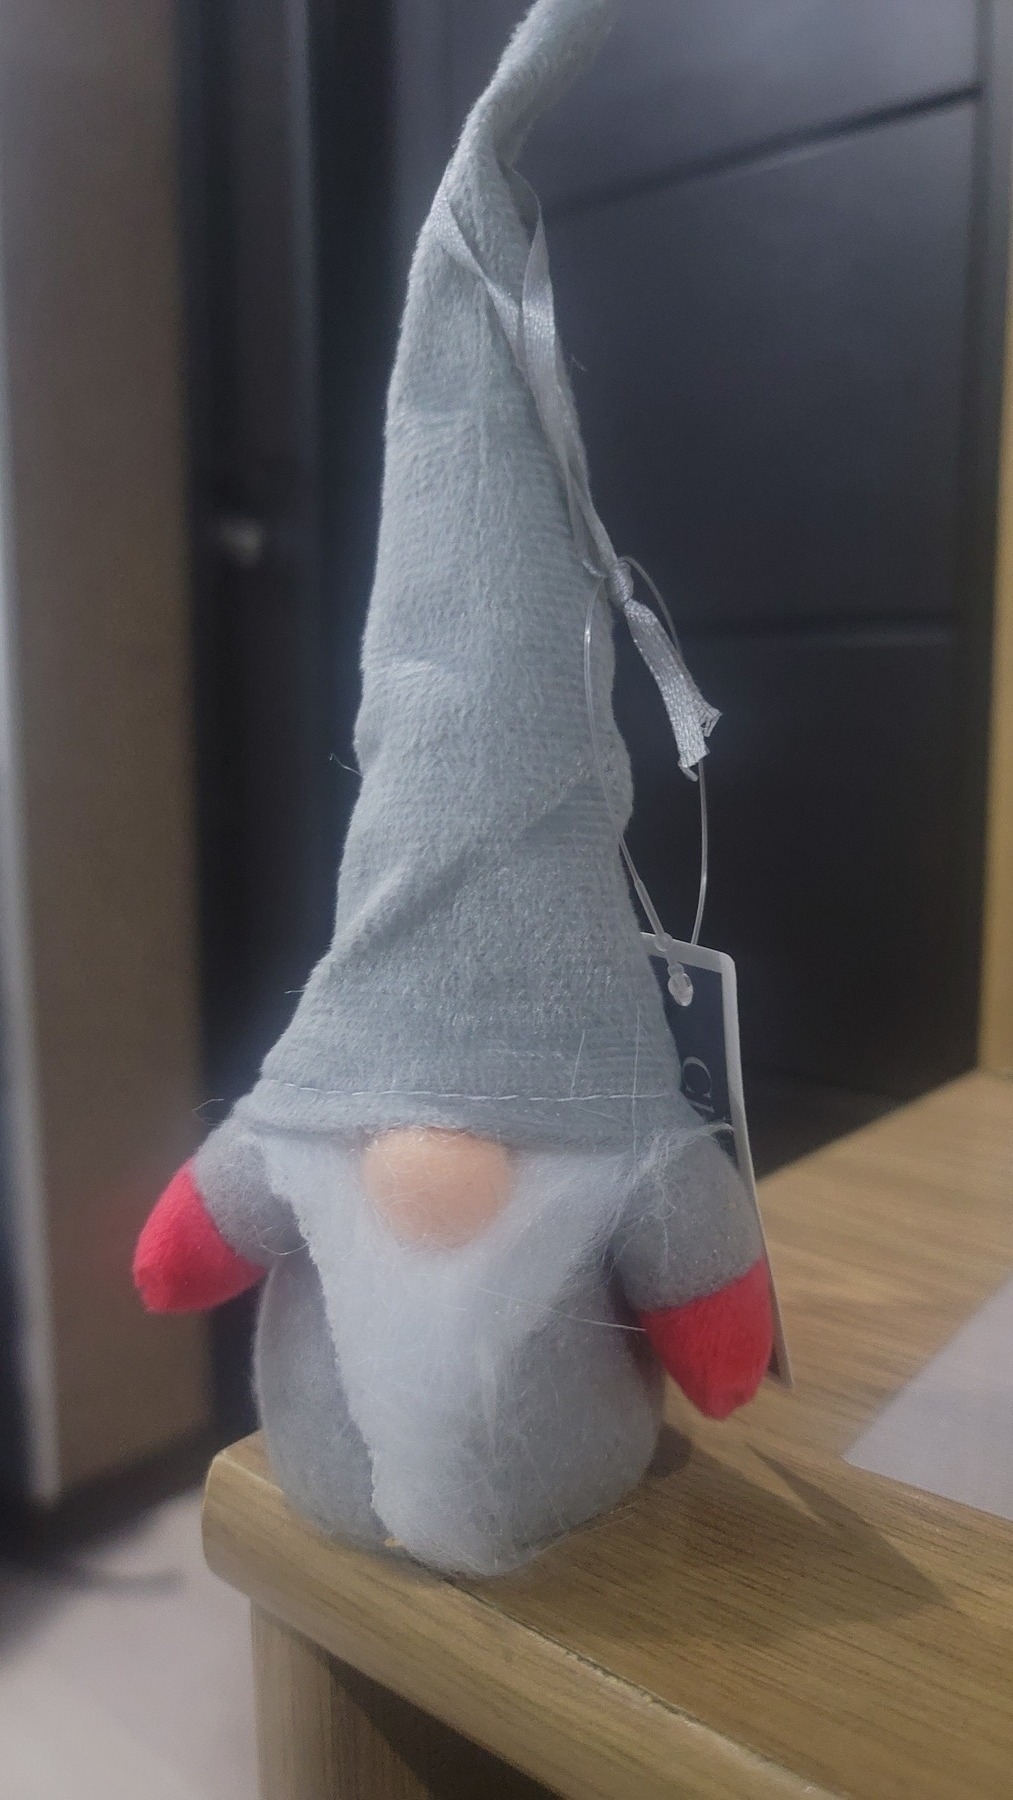 ornament of a gnome-looking man with a very tall hat made of styrofoam covered by fabric